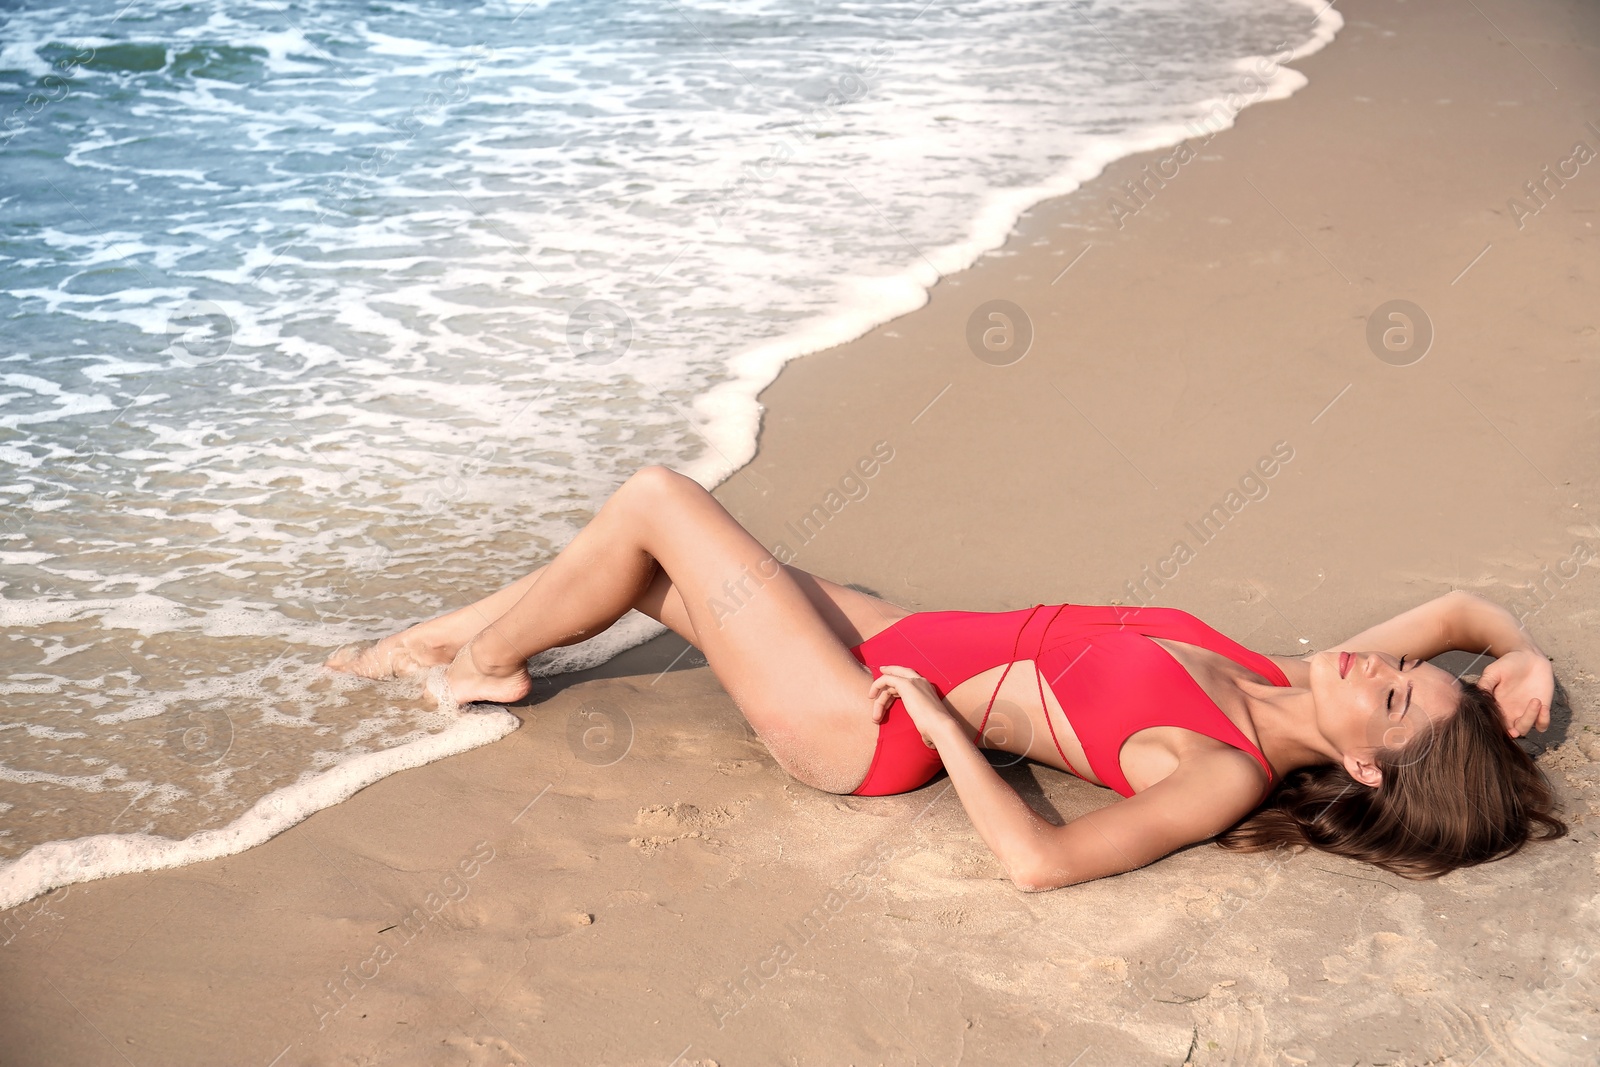 Photo of Attractive young woman in beautiful one-piece swimsuit on beach